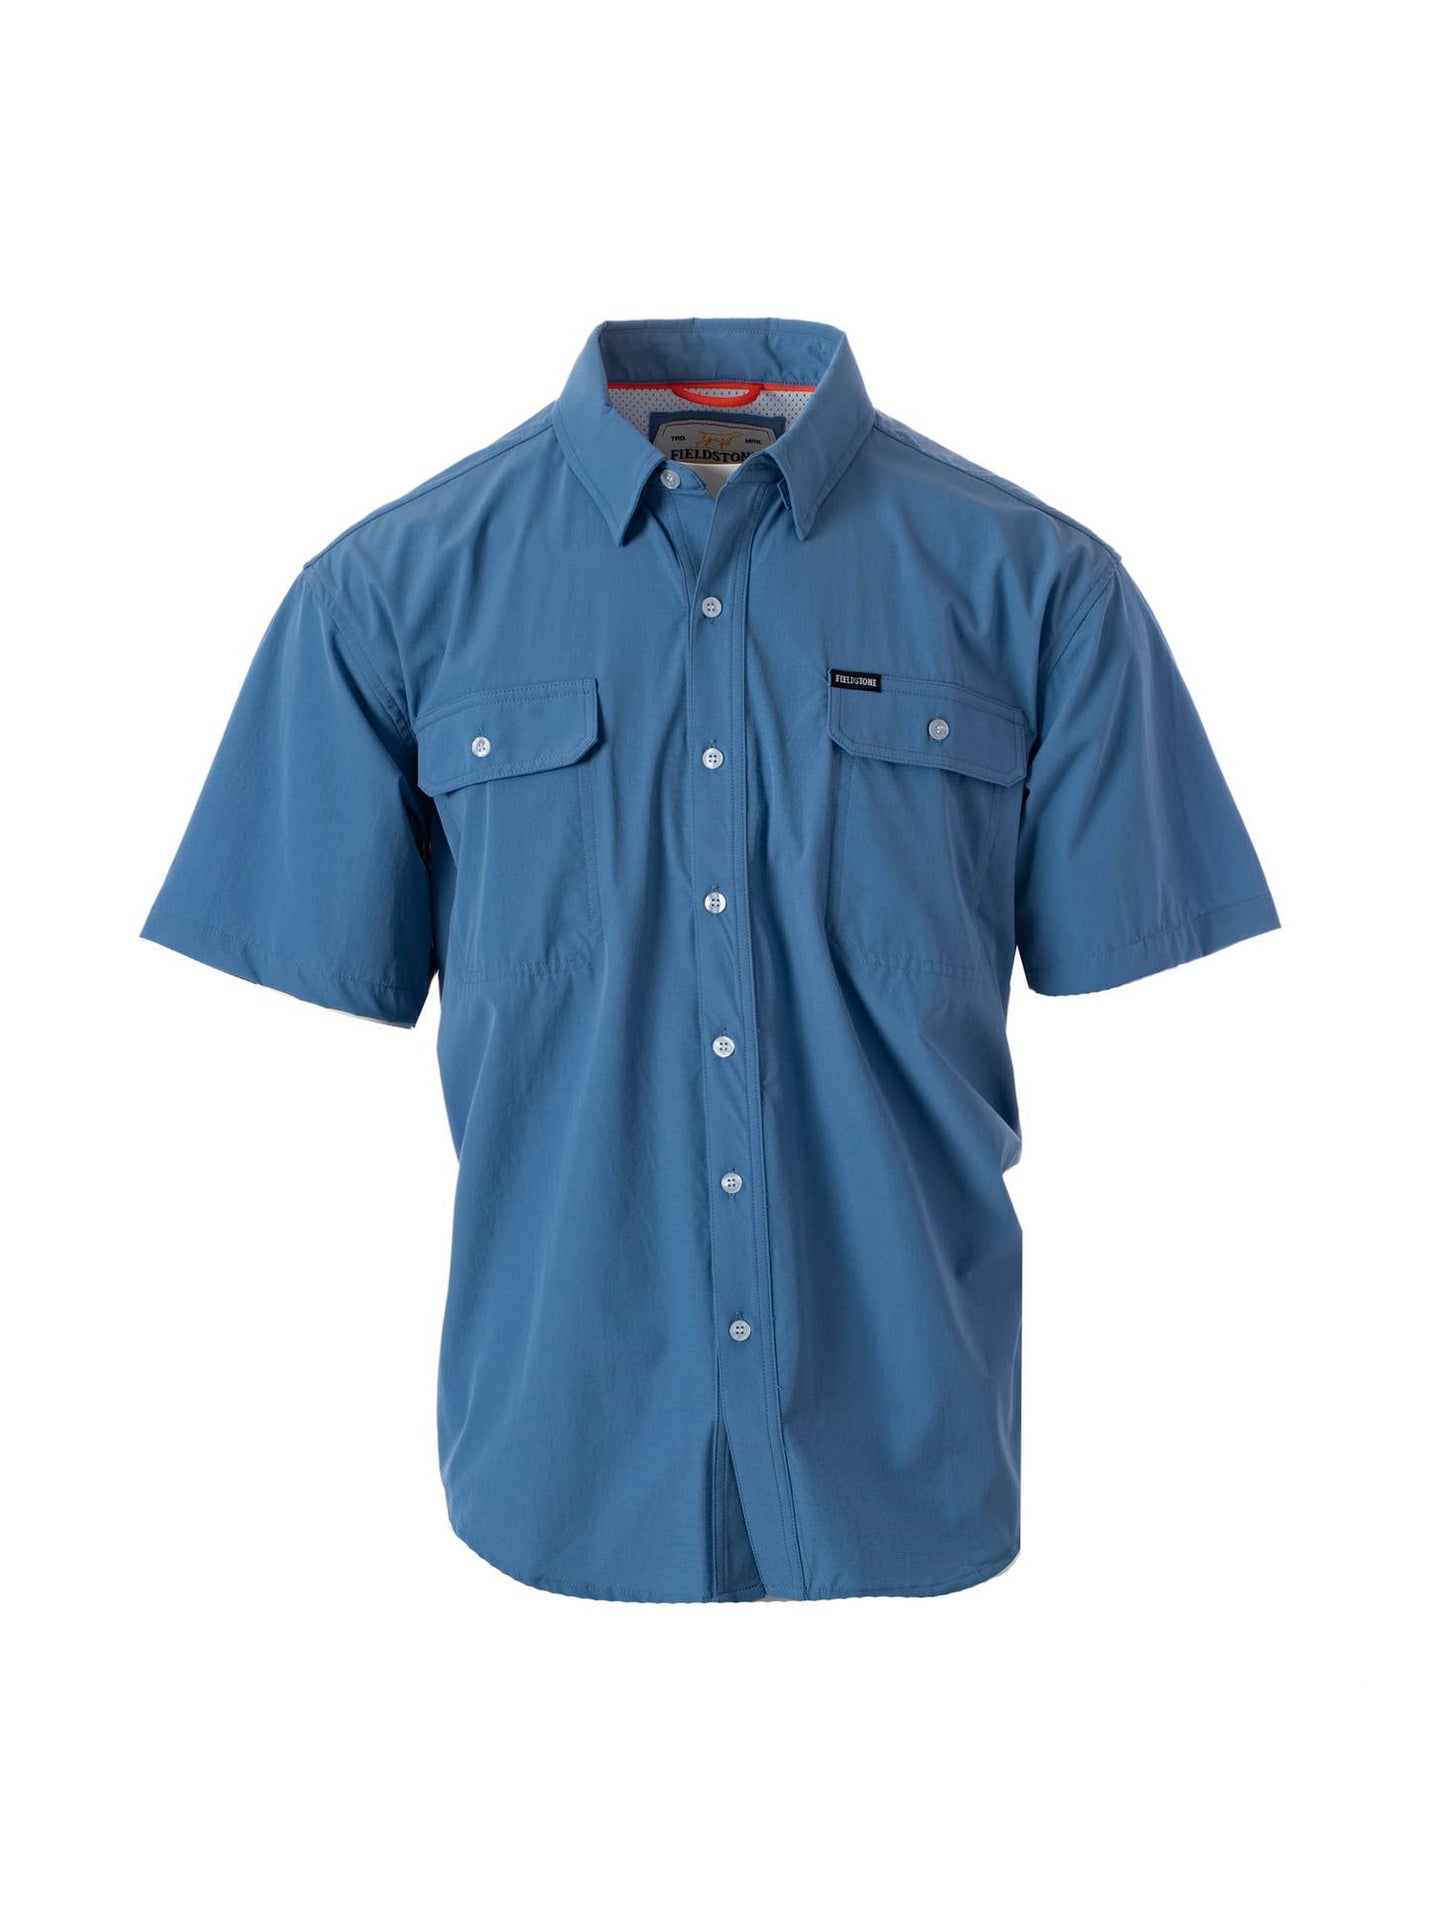 The Sportsman Button Down shirt from Fieldstone Outdoor Provisions Co. is the perfect choice for fishing trips and sportsman activities.